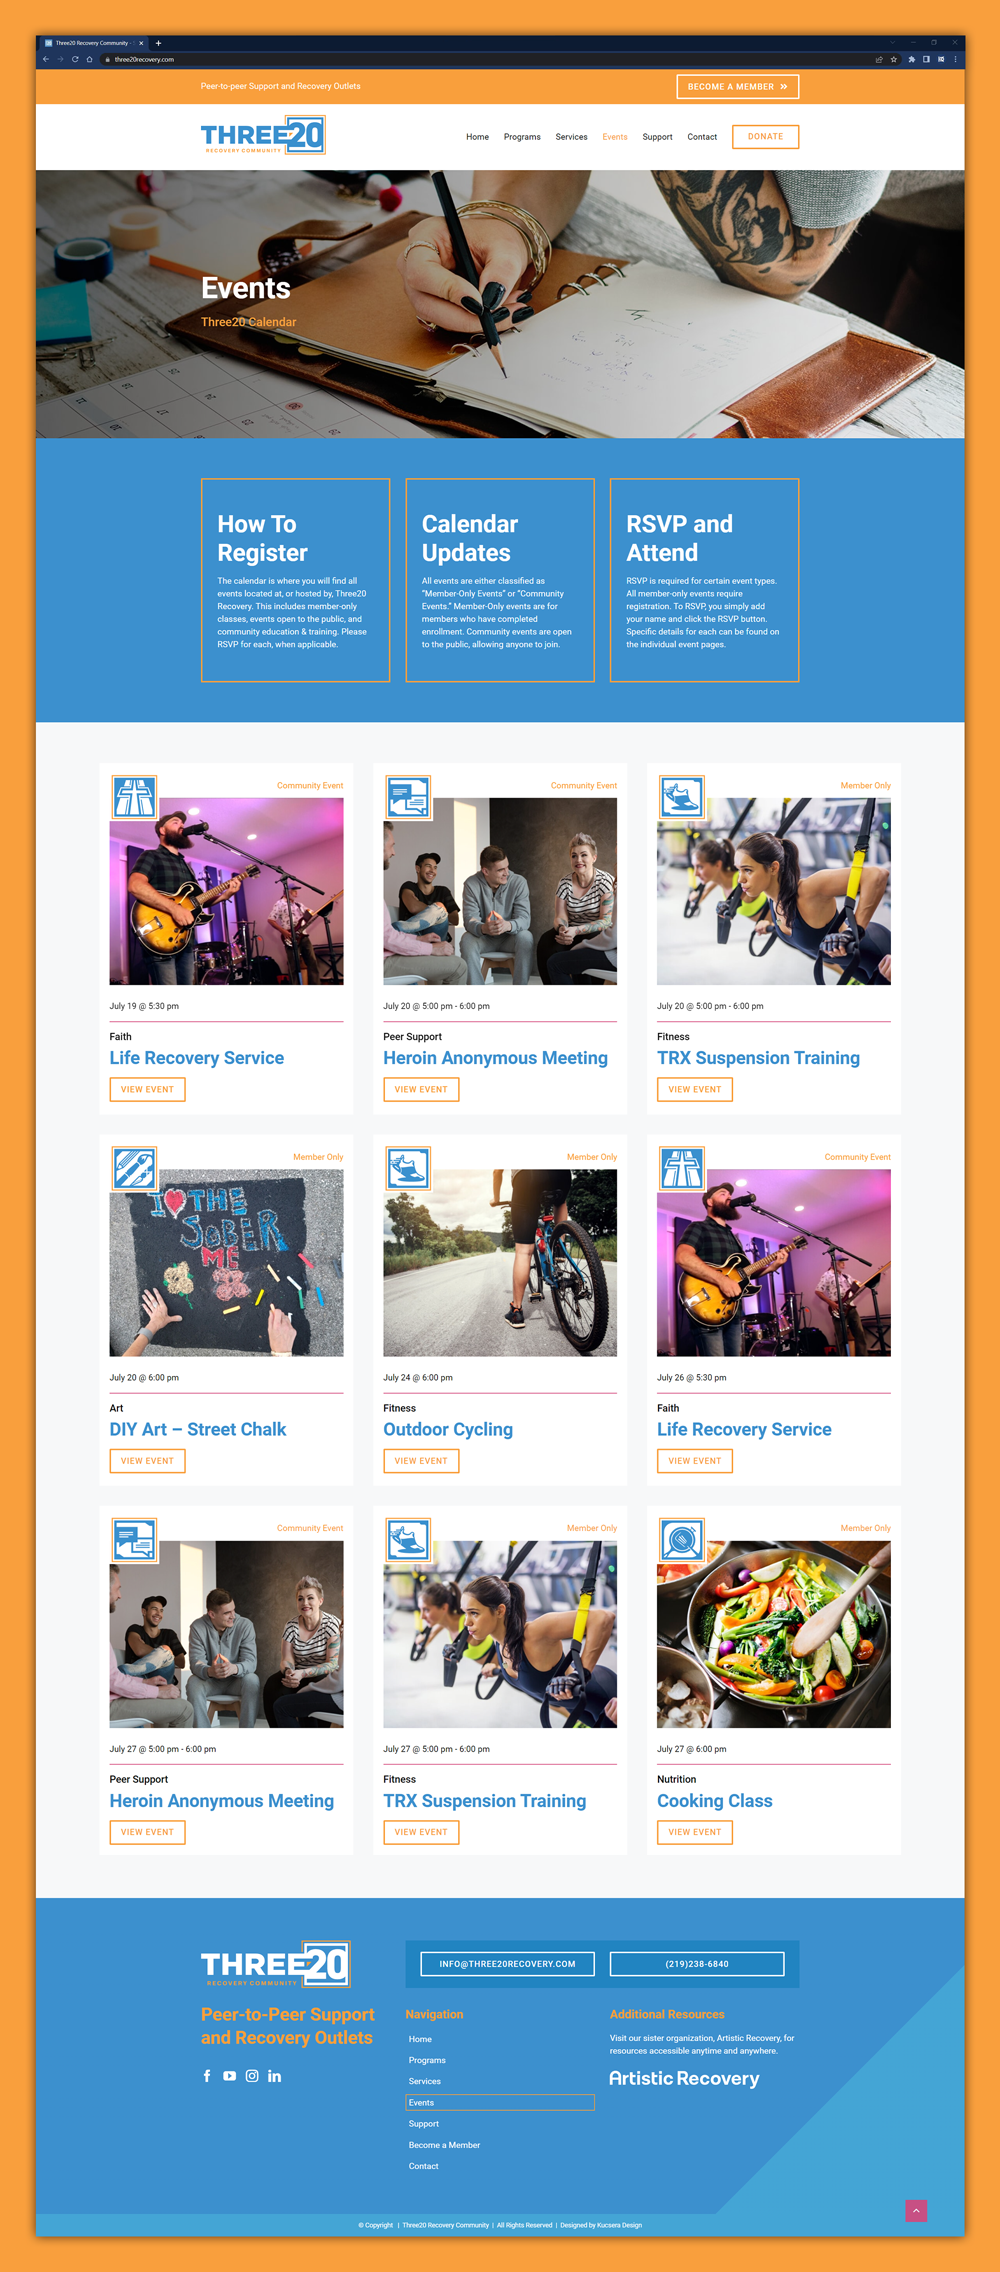 Three20 Recovery Community website design for Events page